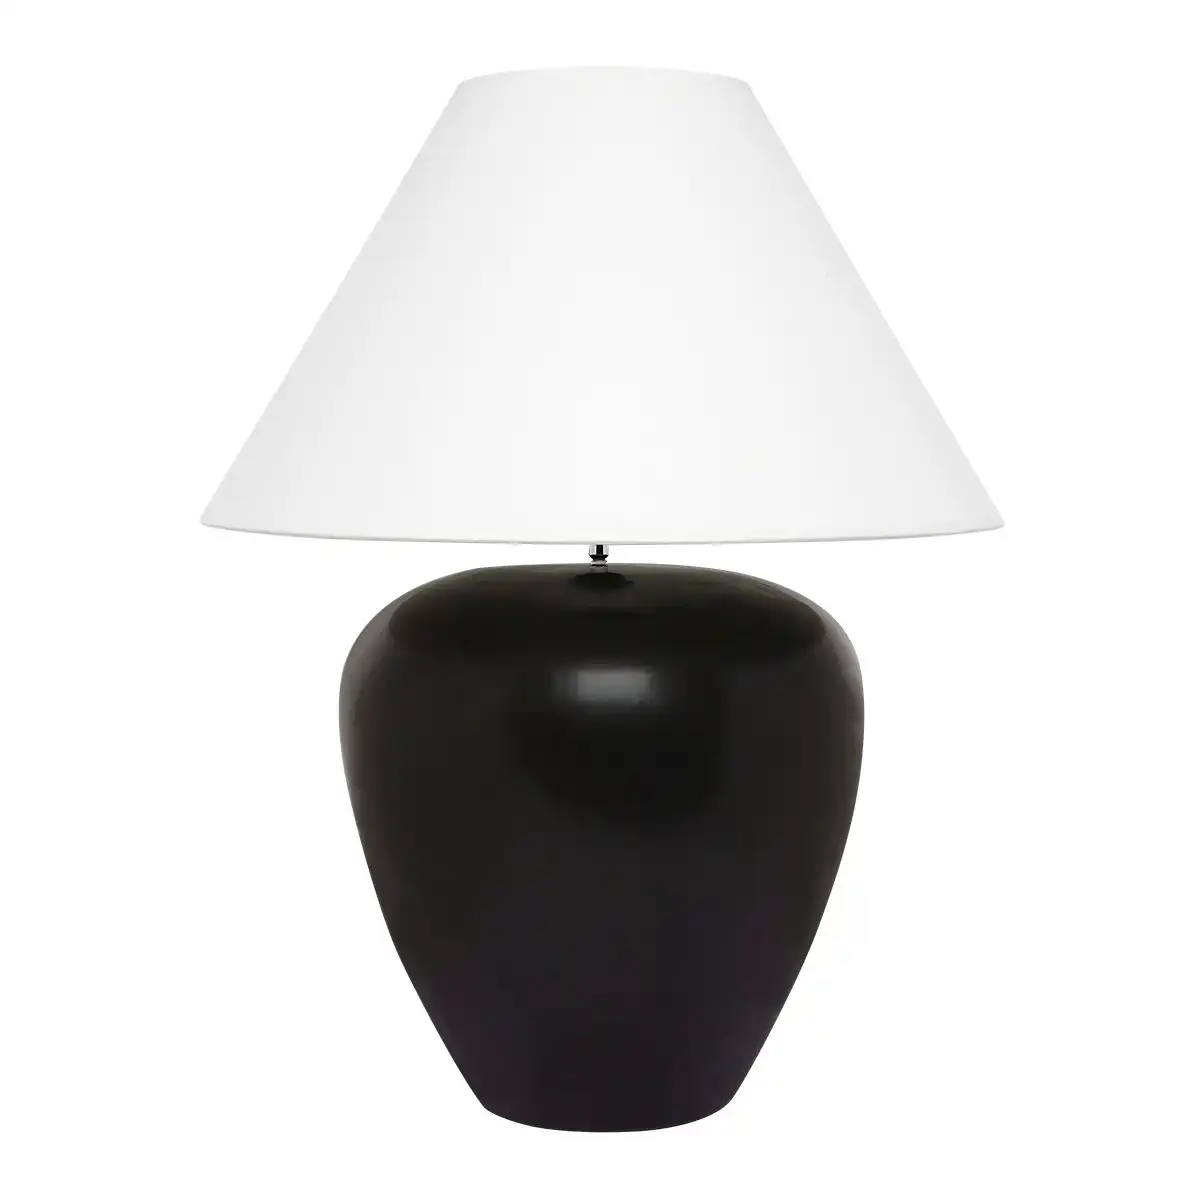 Cafe Lighting Picasso Table Lamp - Black with White Shade